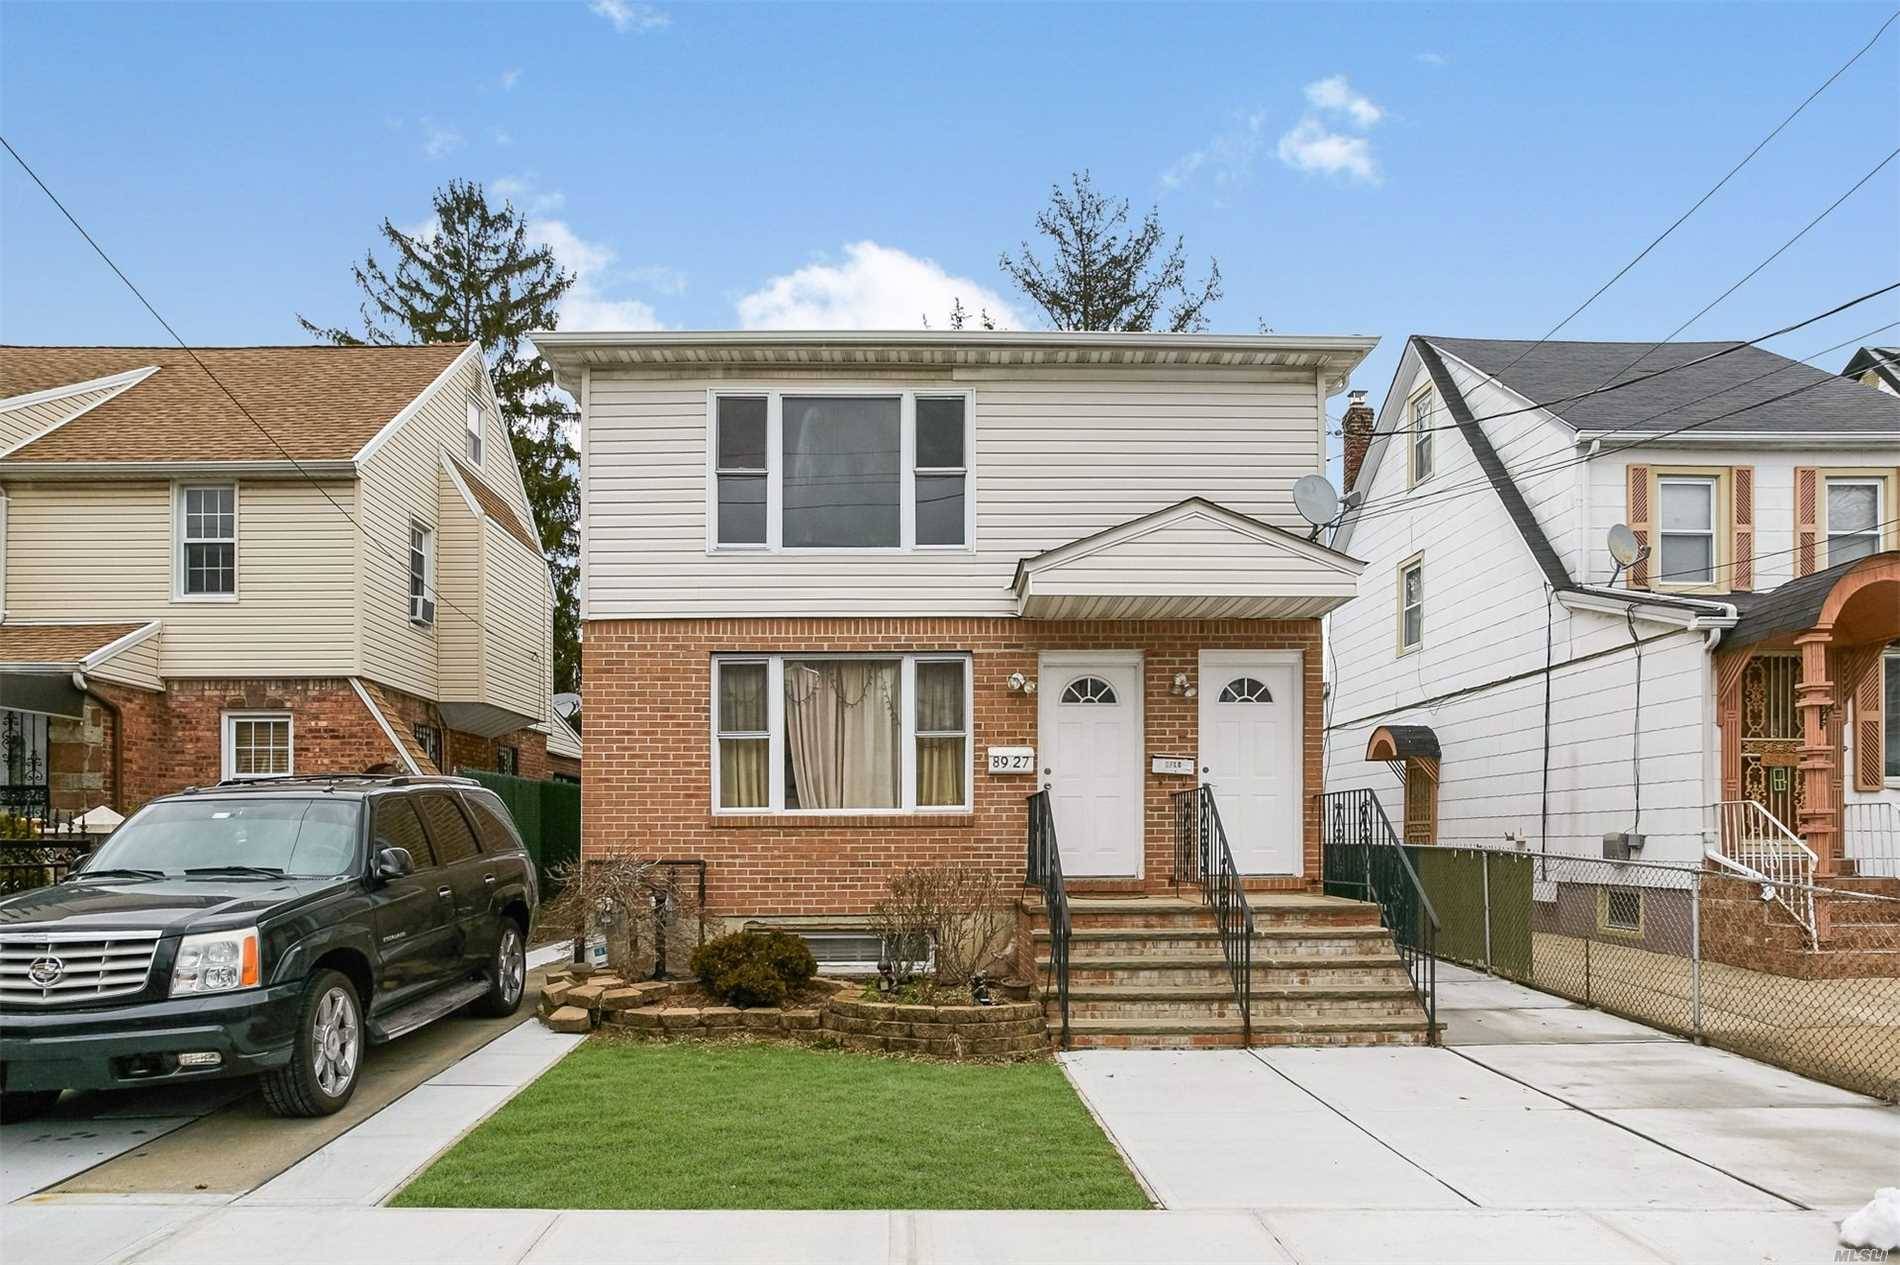 This Is Your Opportunity To Own A Rarely Available, Legal 2 Family, Fully Detached Home With Private Parking In Beautiful Prime Queens Village North.